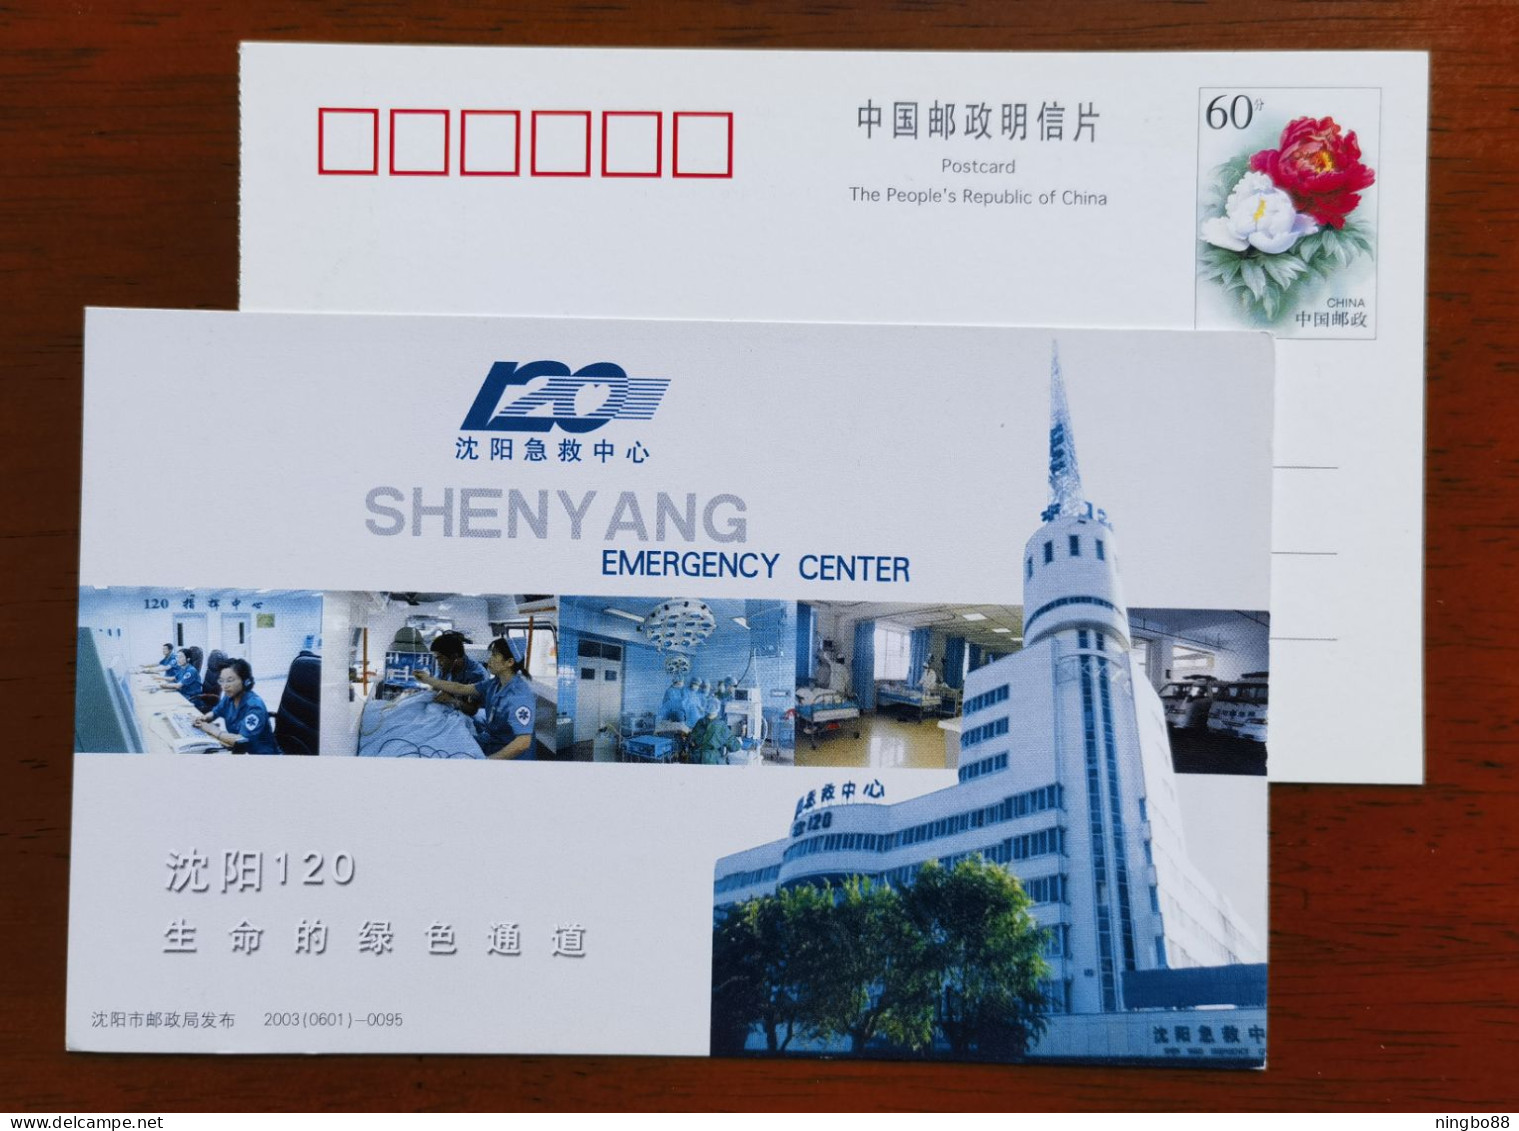 120 The Green Channel Of Life,Command Center,ambulance,China 2003 Shenyang Emergency Center Advertising Pre-stamped Card - Erste Hilfe